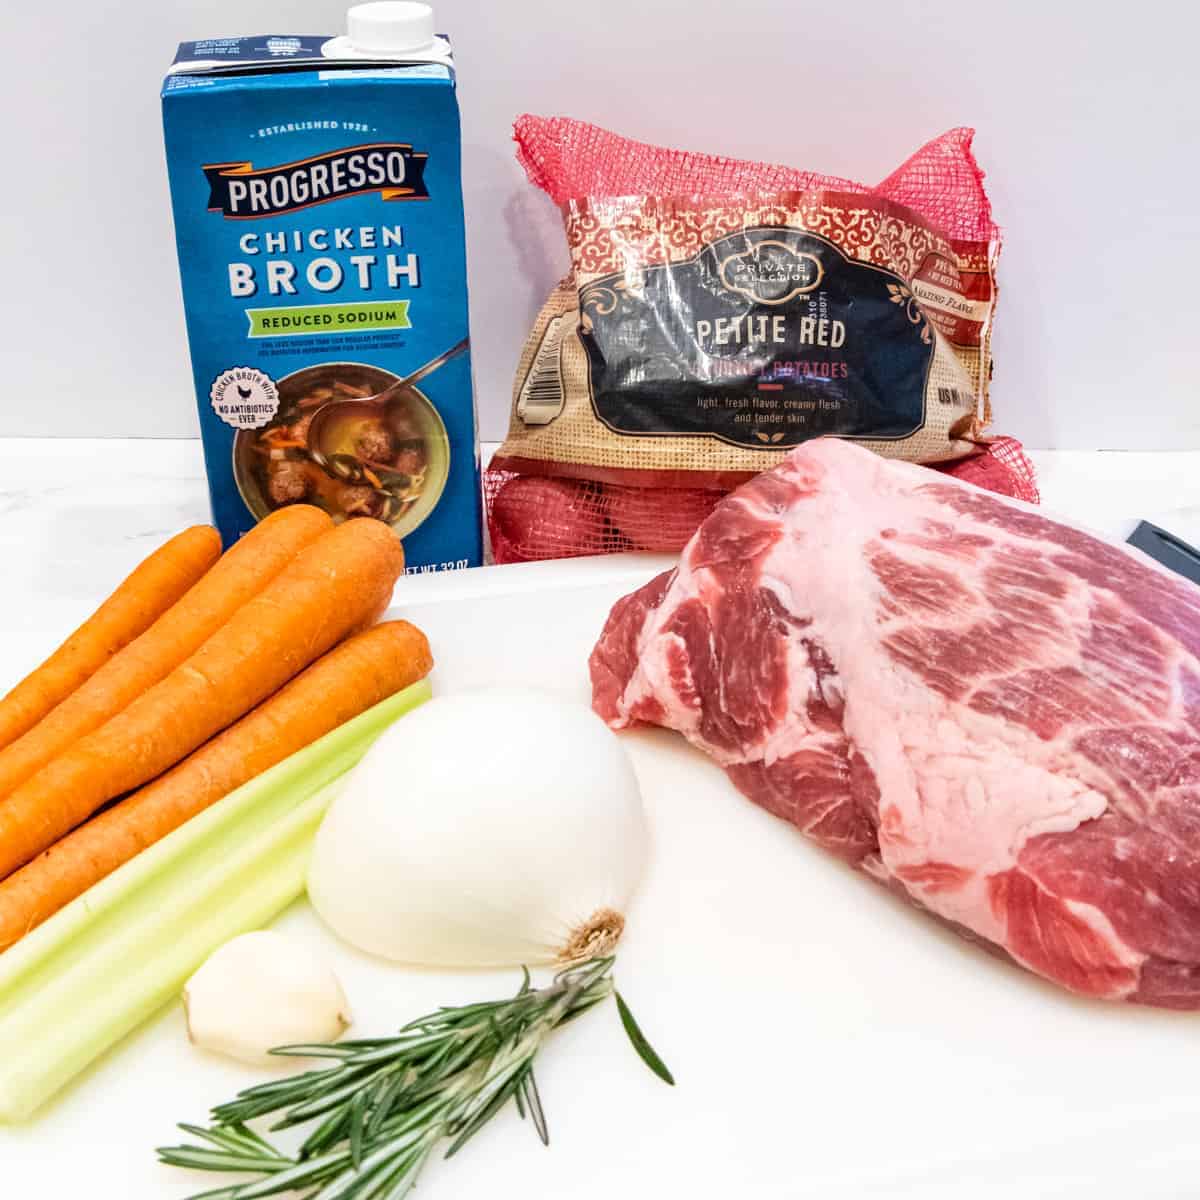 The ingredients for the pork roast are shown set on a counter.